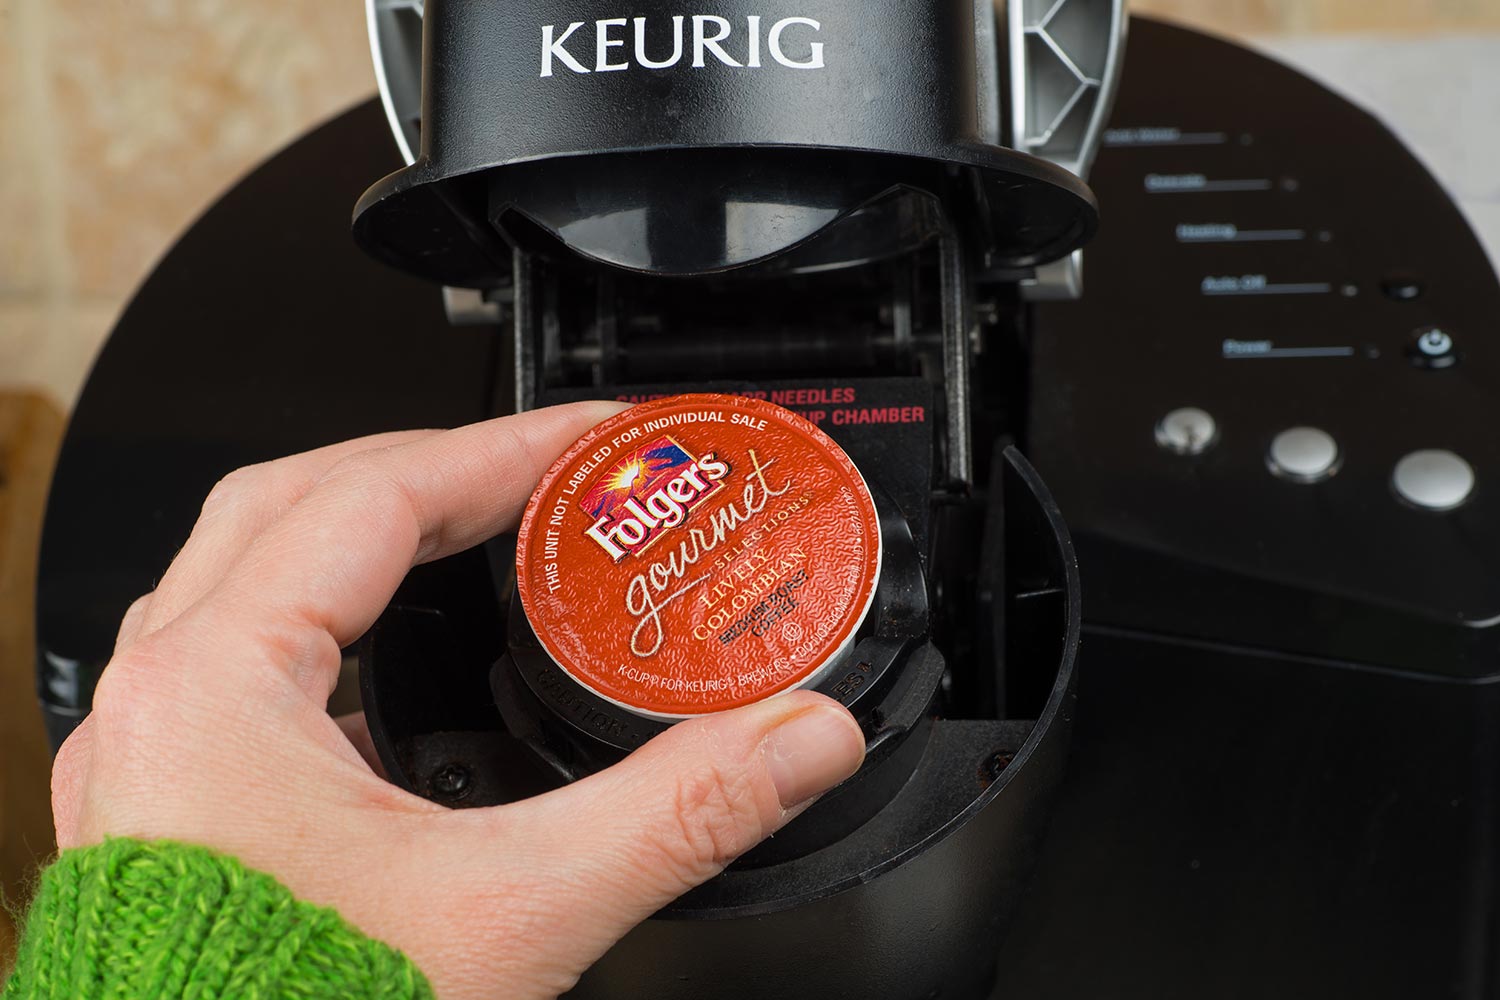 Woman inserting single-serve K-cup Foldger's coffee into a Keurig coffee maker